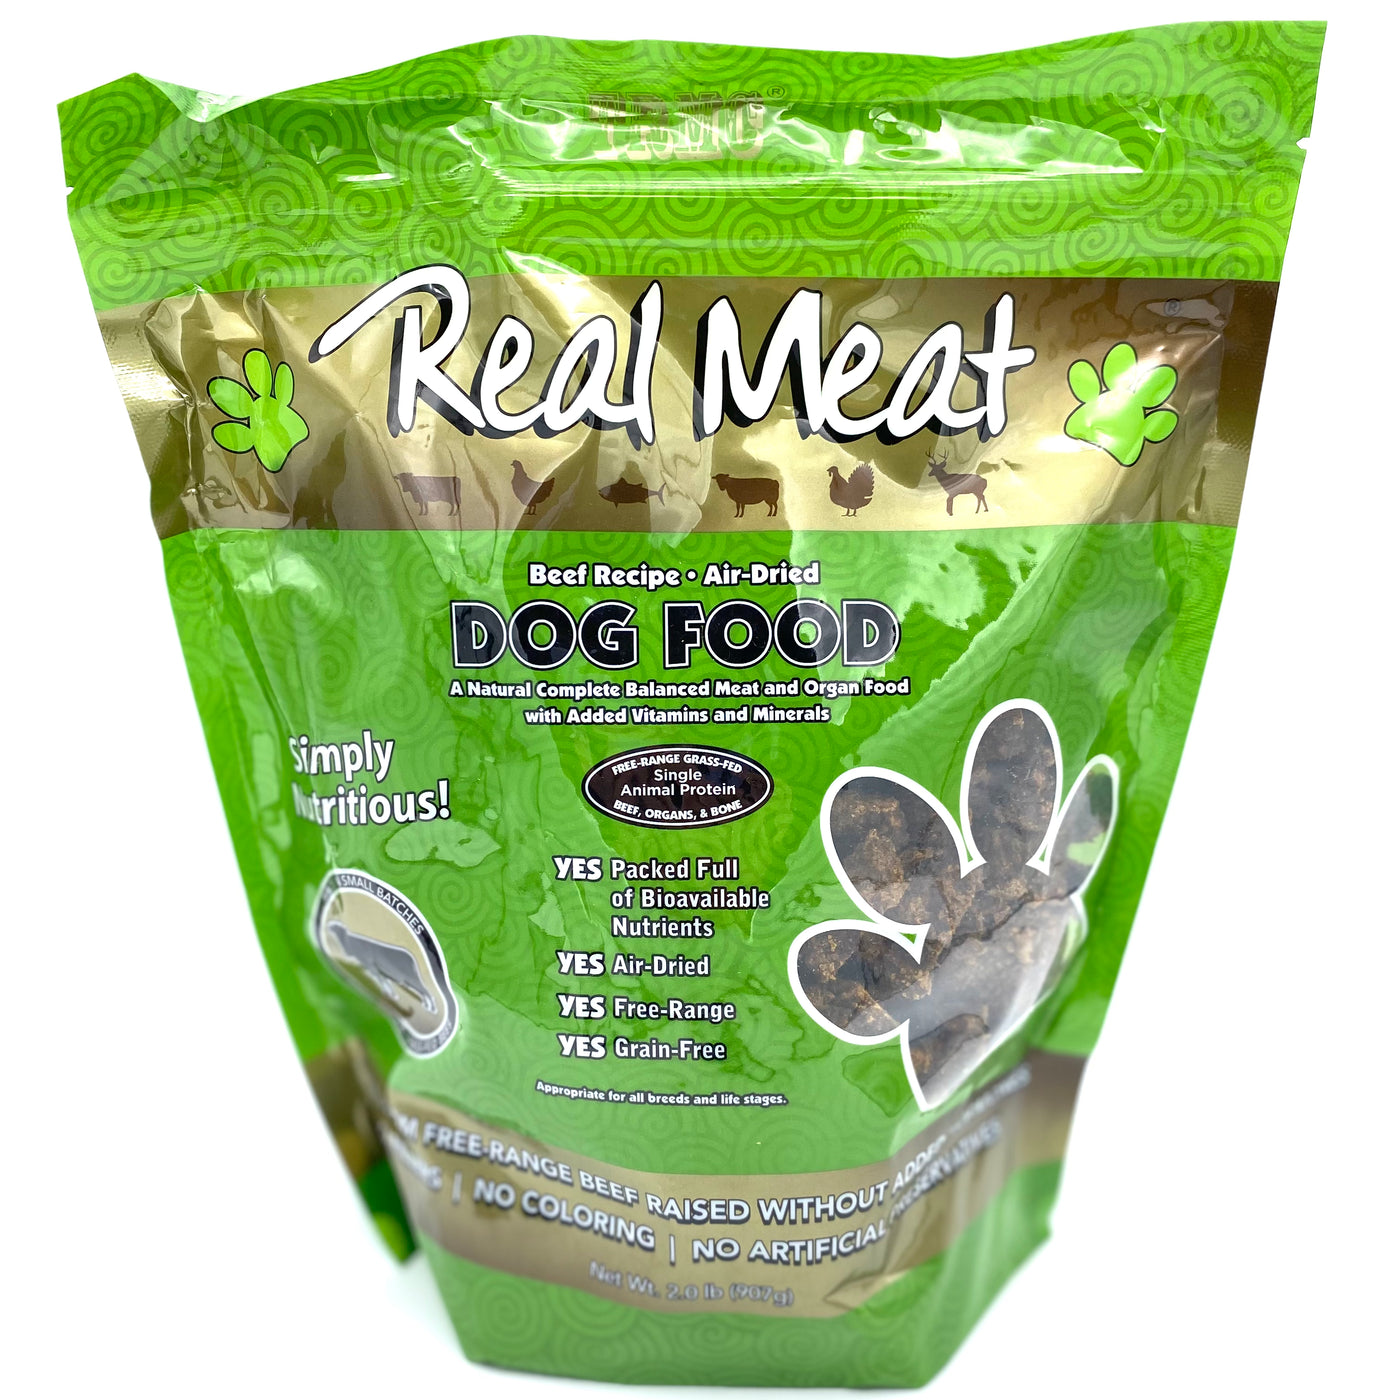 Real Meat Beef Recipe Dog Food 2lb